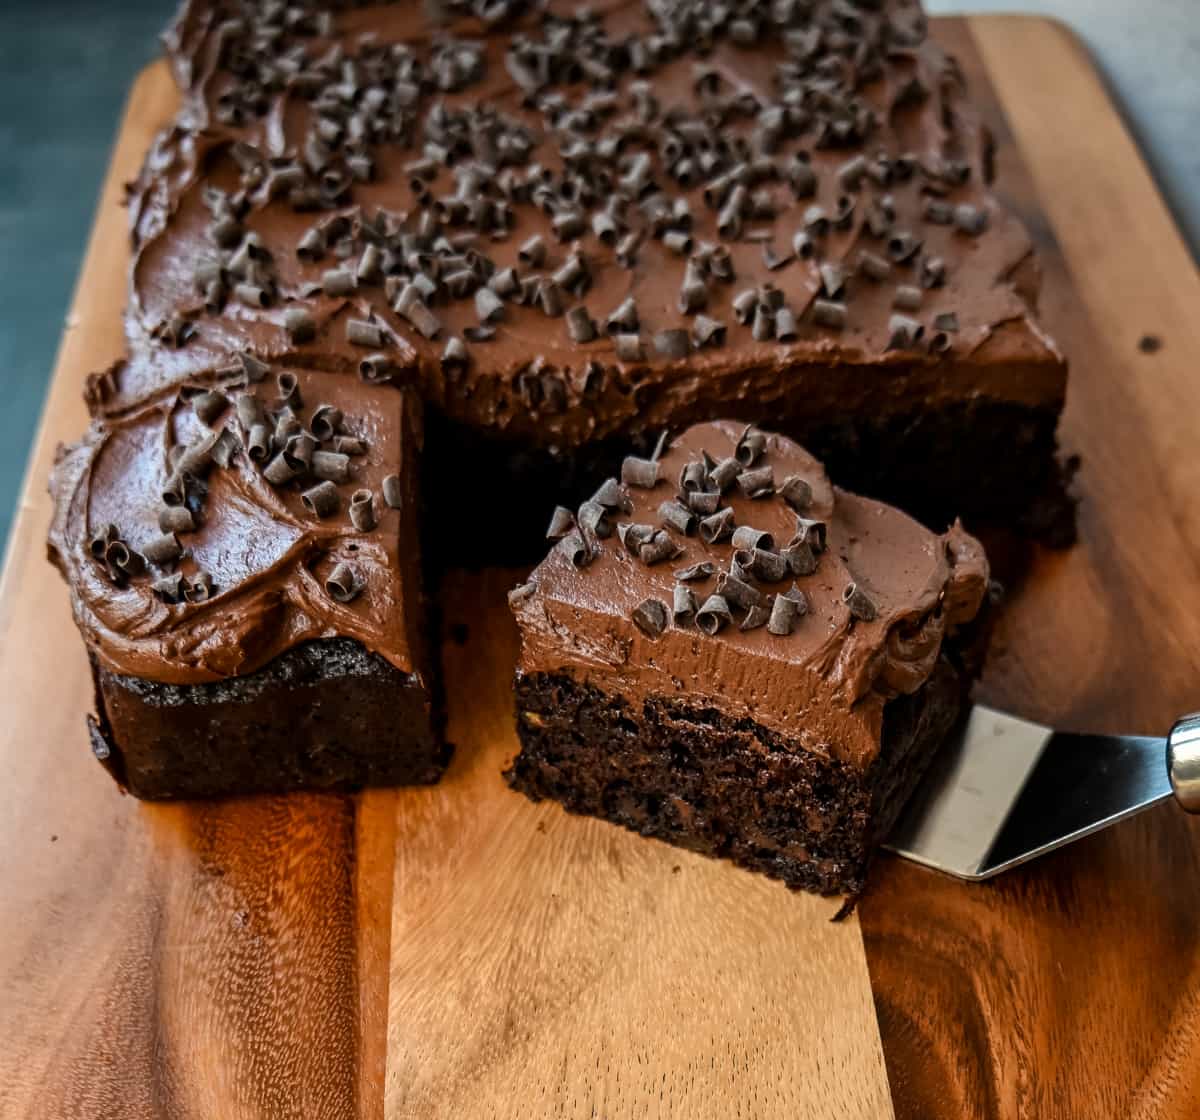 How to make the best chocolate zucchini cake with chocolate frosting. This frosted chocolate zucchini cake is the most moist, rich chocolate cake with the most decadent chocolate frosting. You will not even realize you are eating zucchini!